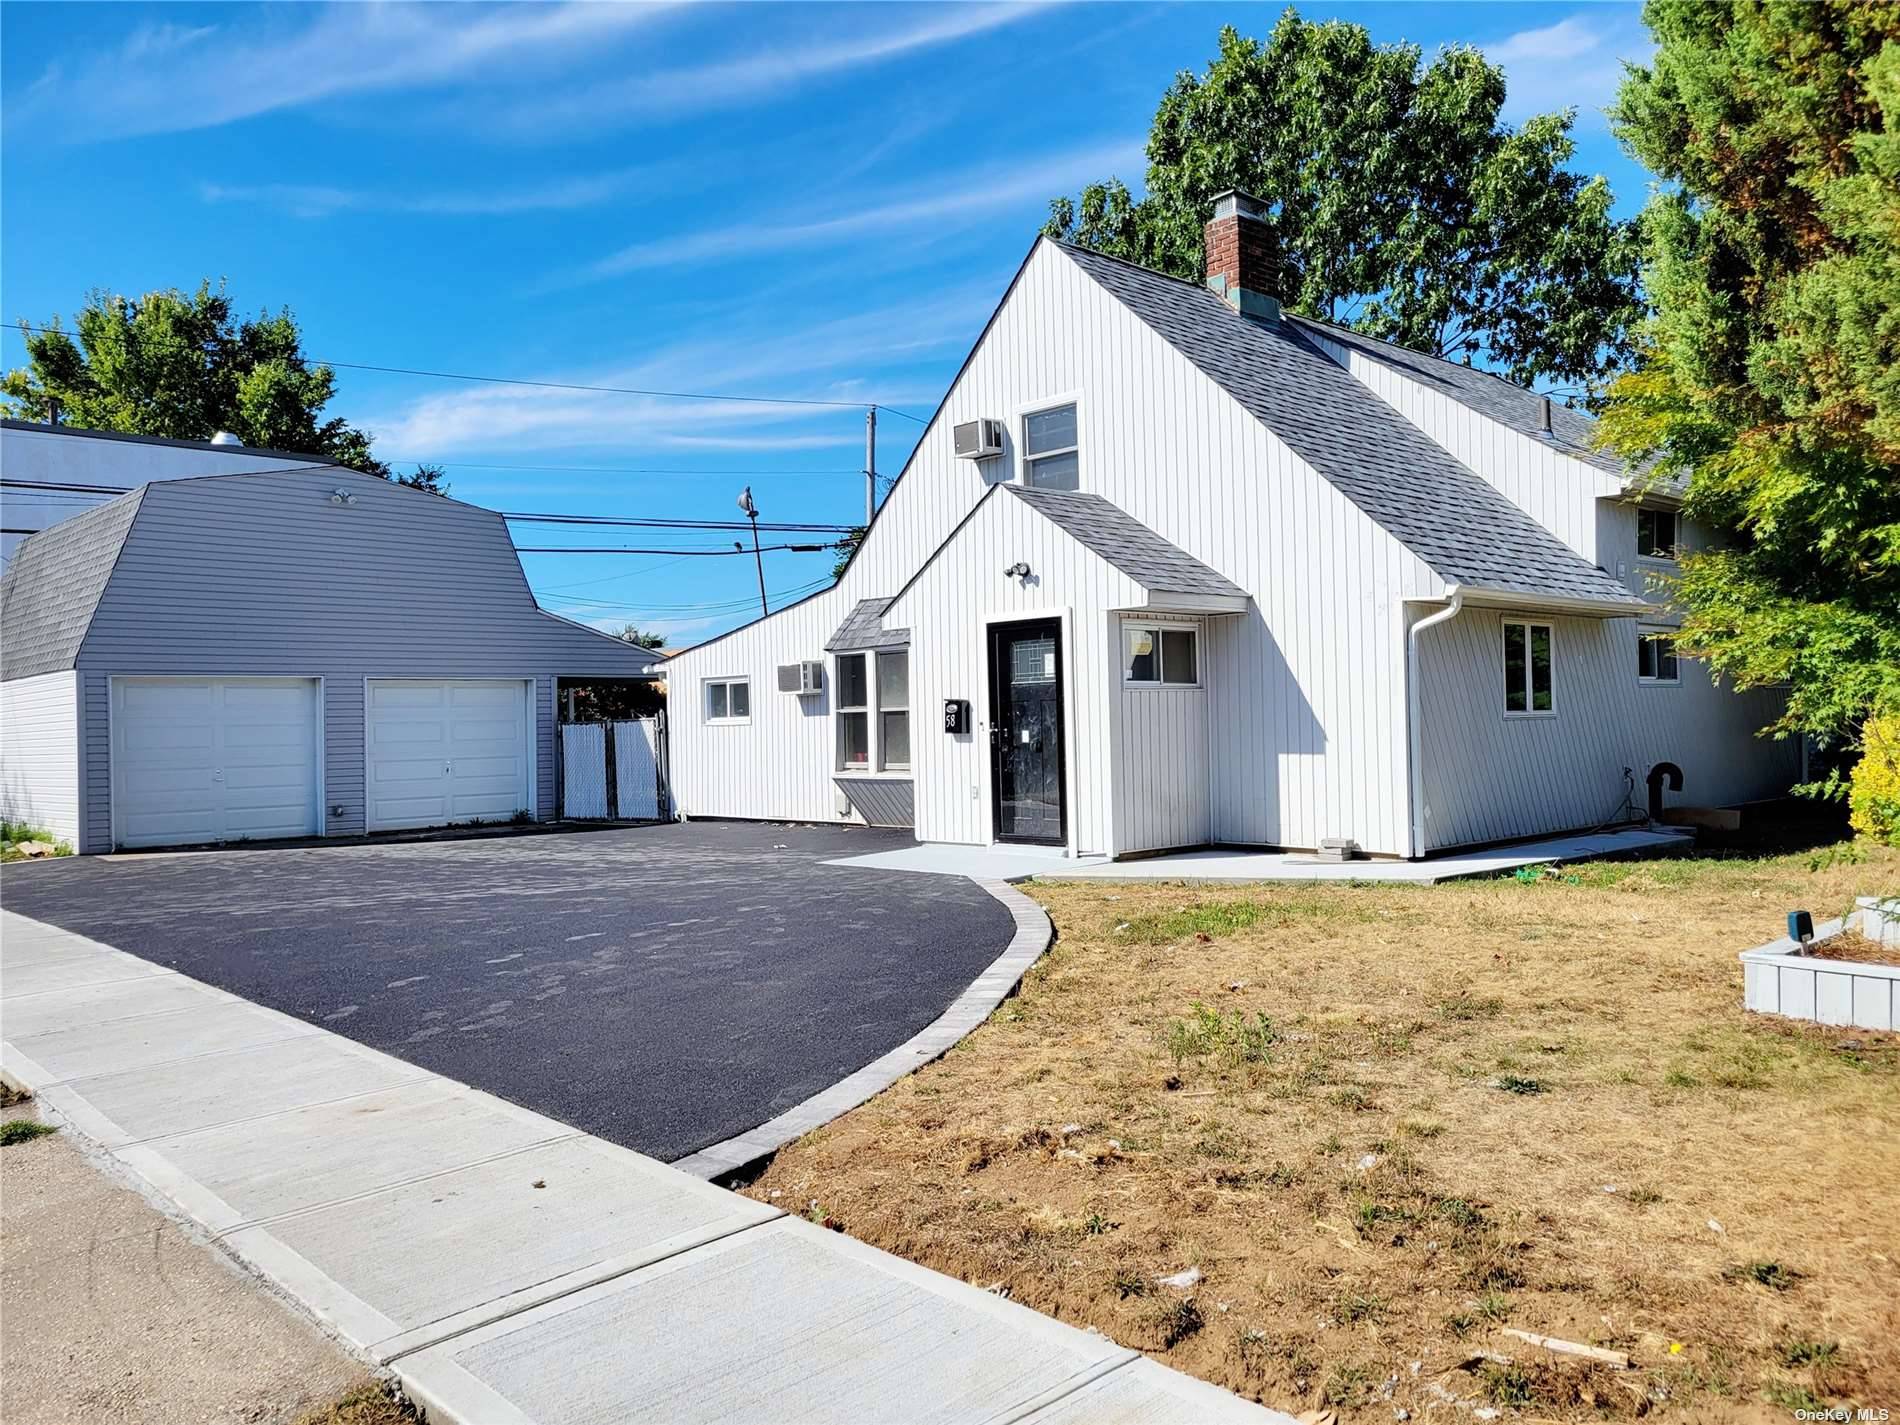 Newly Renovated expanded cape in the heart of Levittown, featuring 5 Bedrooms, 2 Baths, New Kitchen with custom cabinets, stainless steel appliances and quartz counters, updated bathrooms, separate 2 car ...